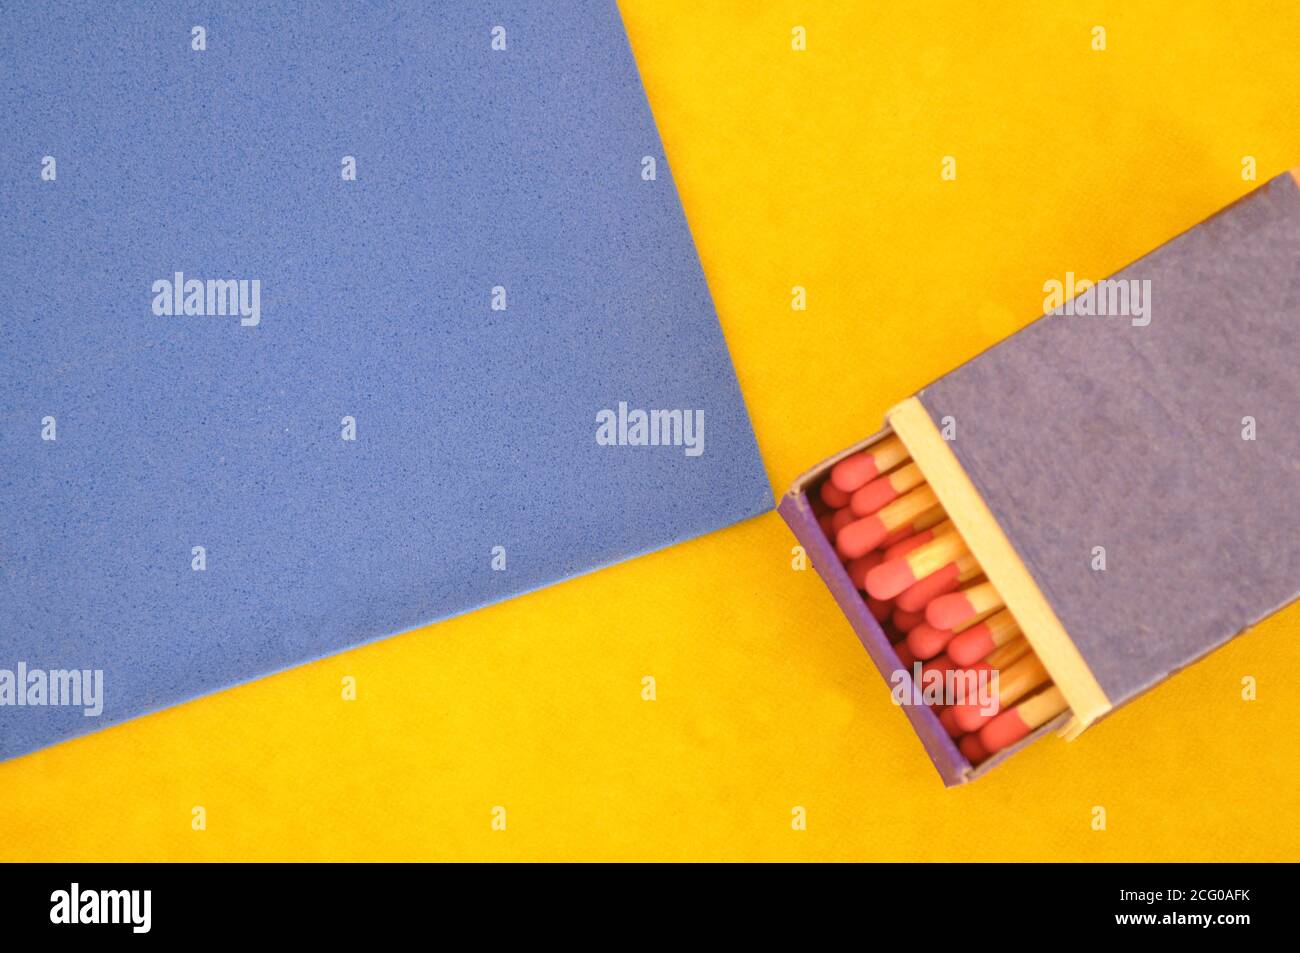 Matchbox, wooden, matchsticks with red head in a half-open box, on a blue and yellow background, with copy space Stock Photo